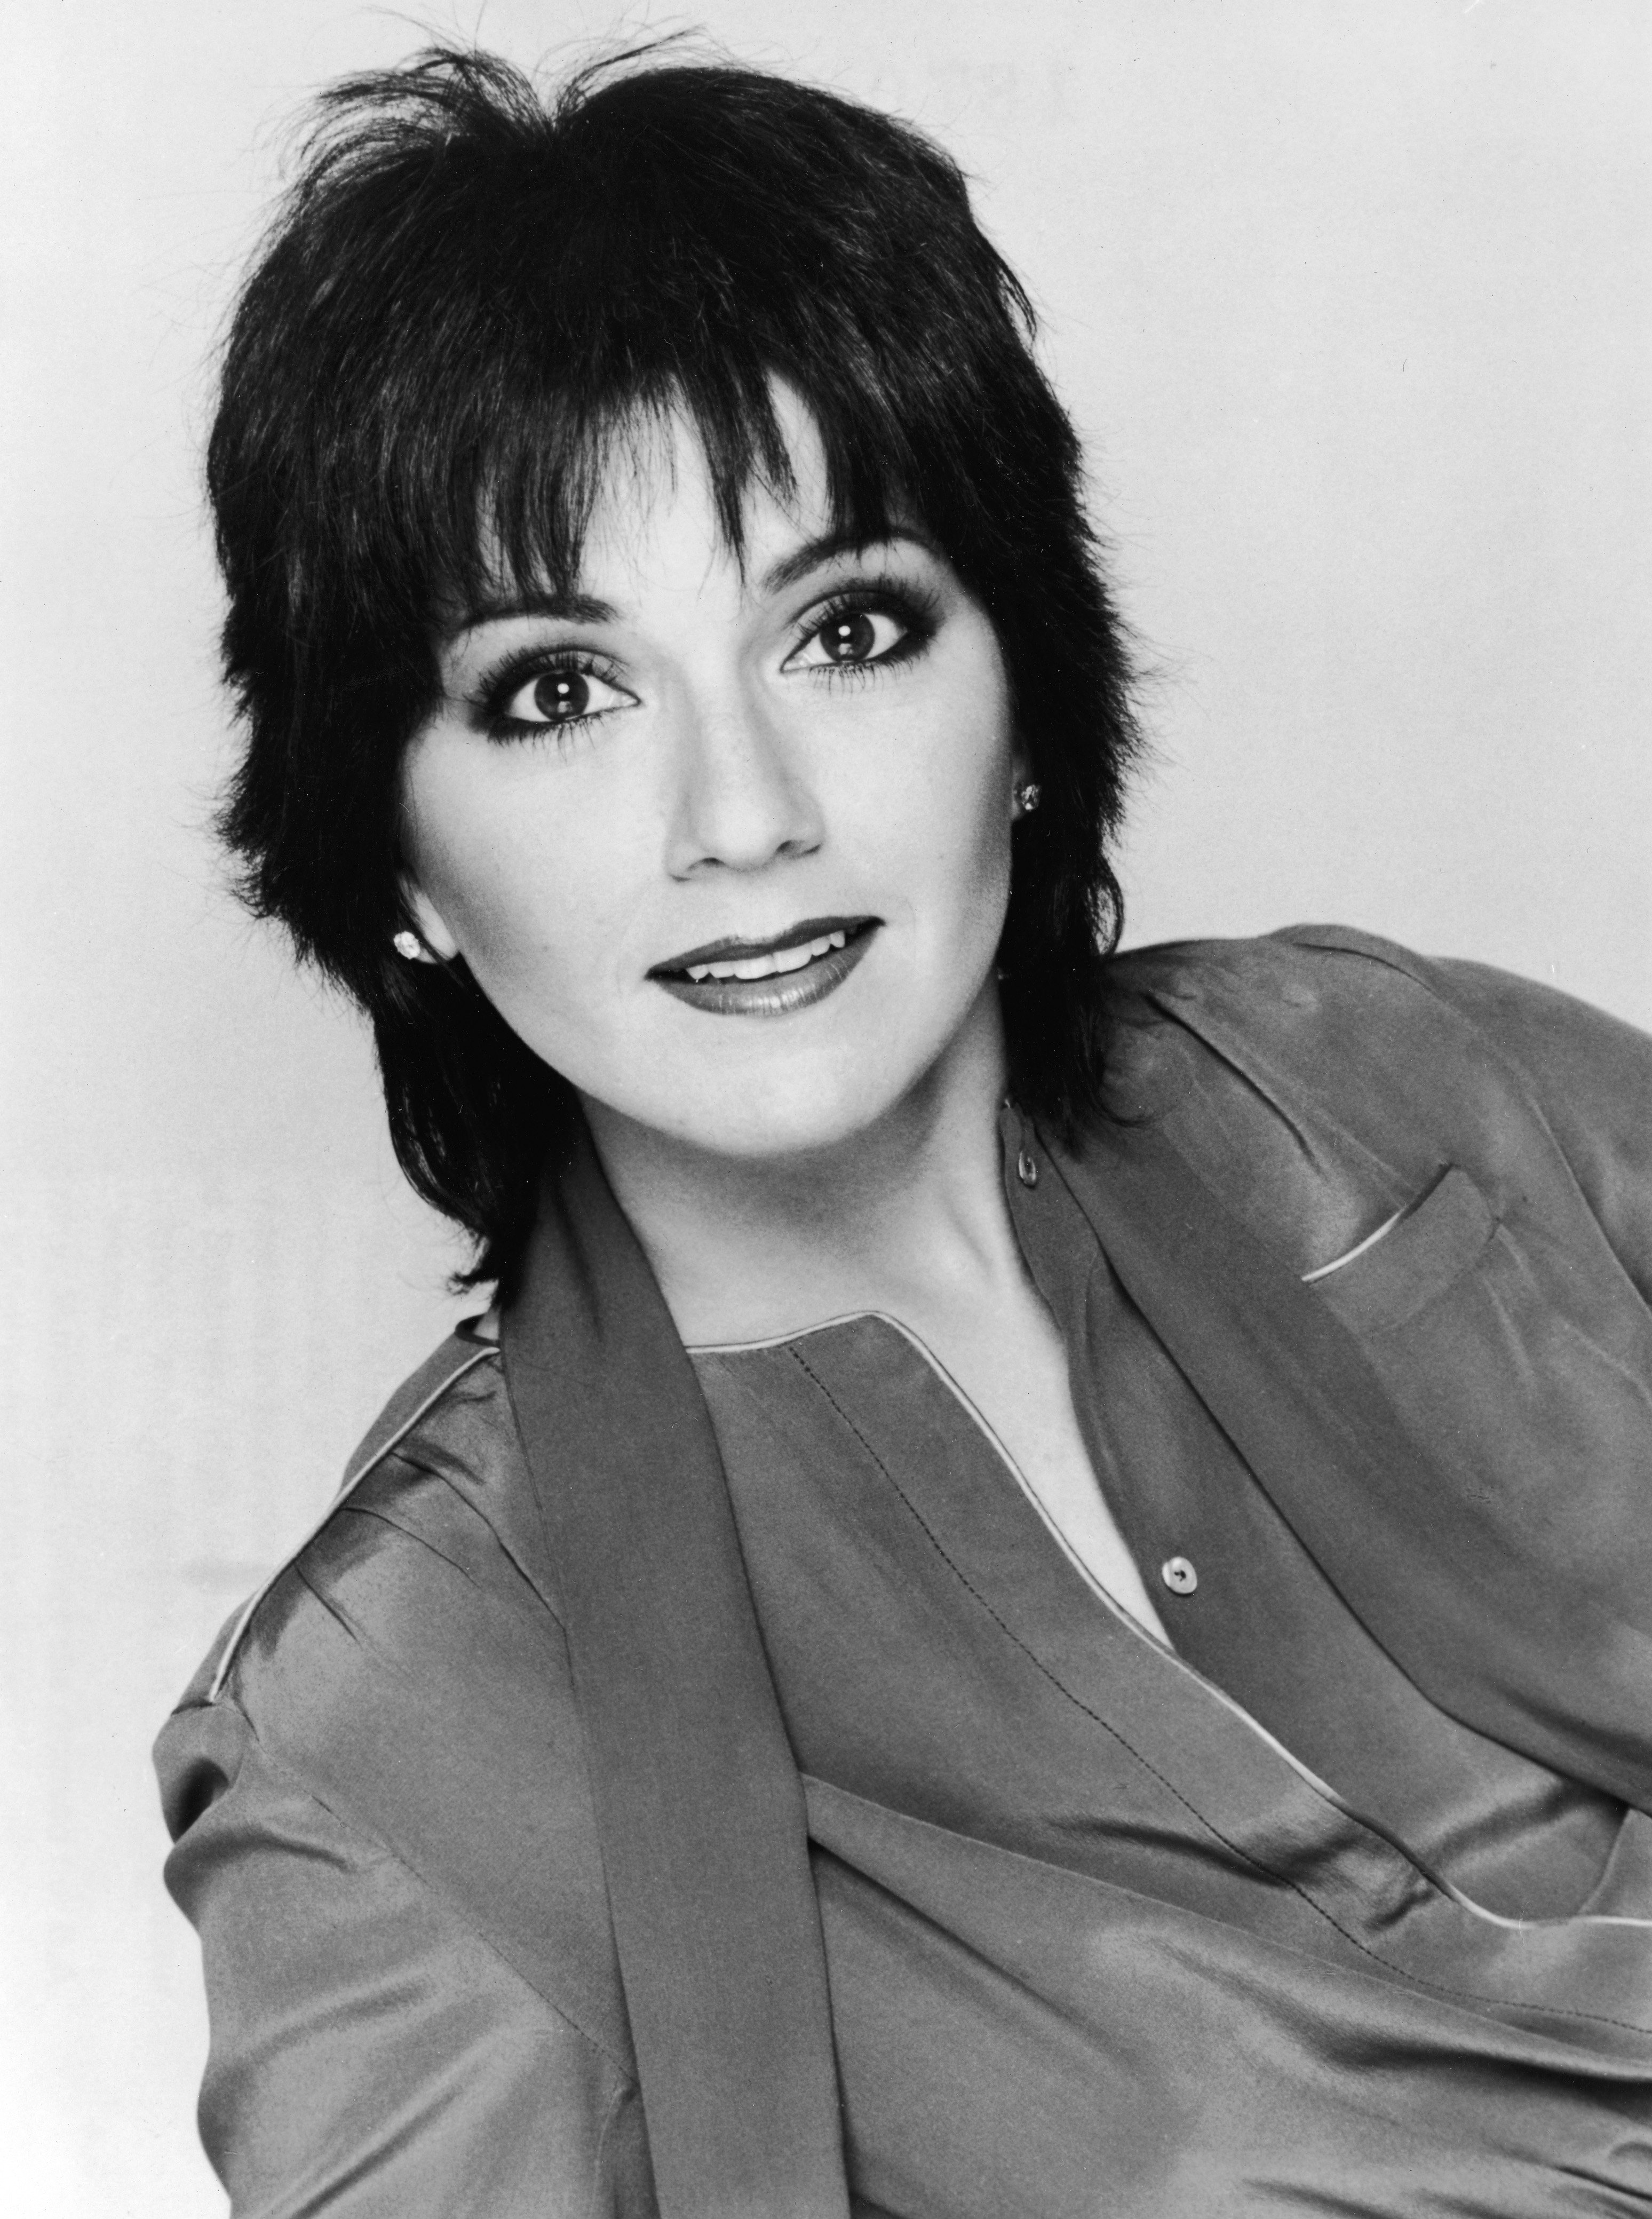 Joyce DeWitt for the 1978 television show "Three's Company" | Source: Getty Images